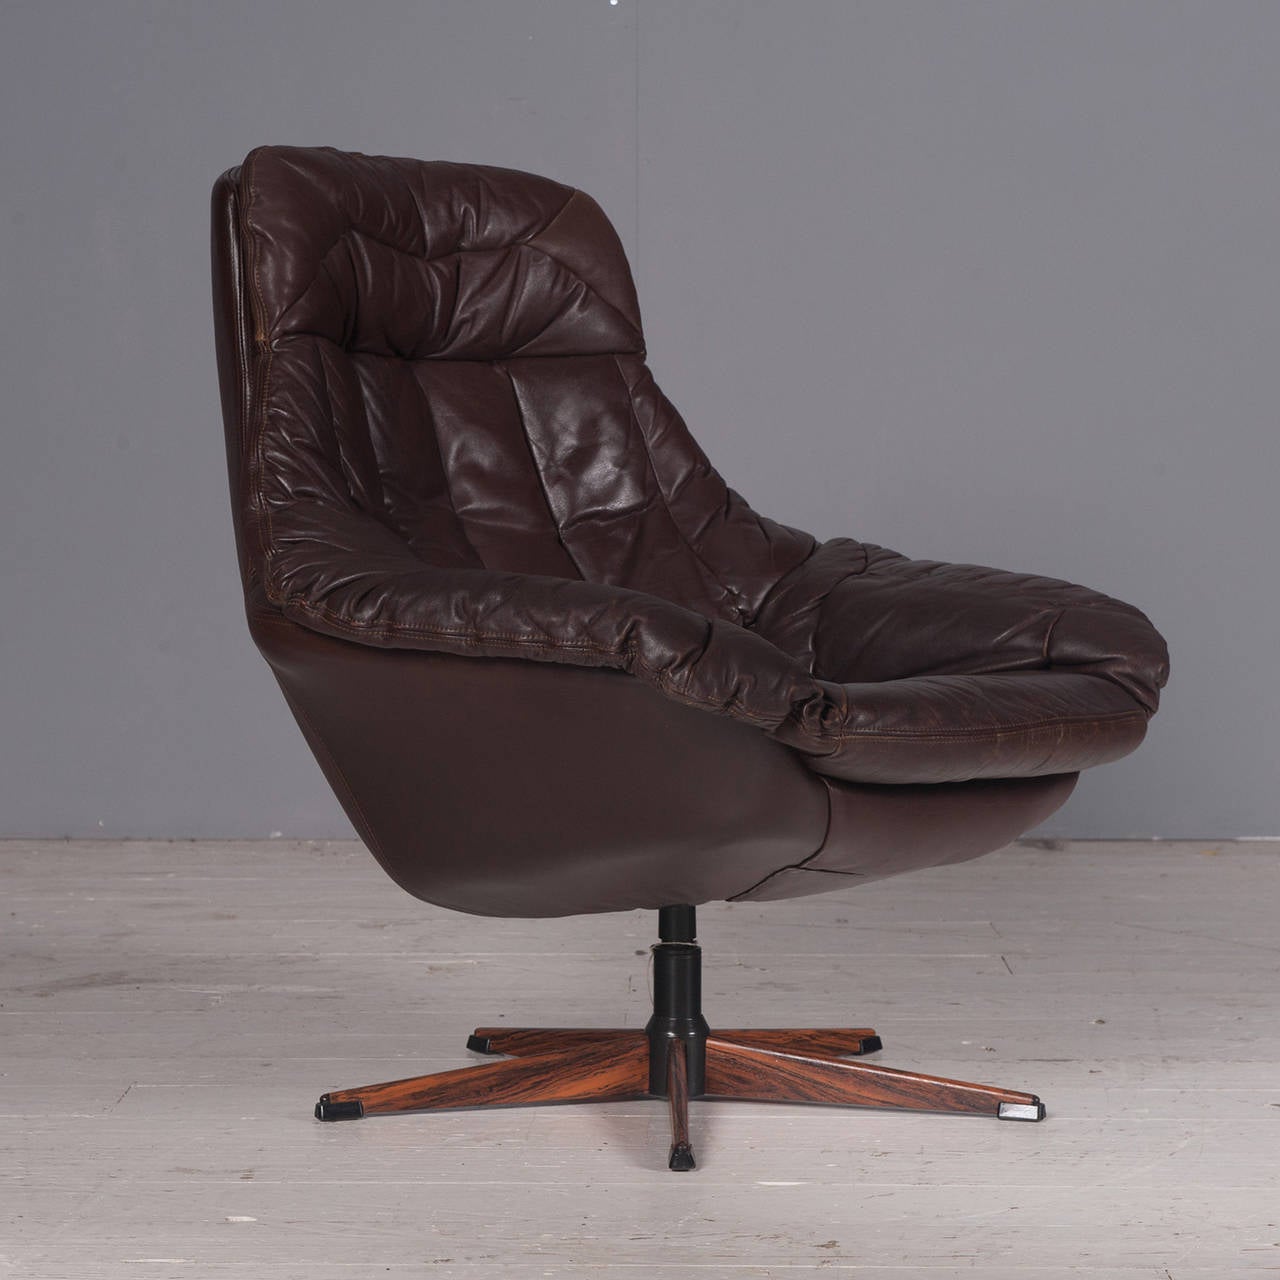 Beautiful rich chocolate brown leather swivel chair by H. W. Klein with a faux rosewood base. Magnificently comfortable, this chair is created relaxing and long conversations.